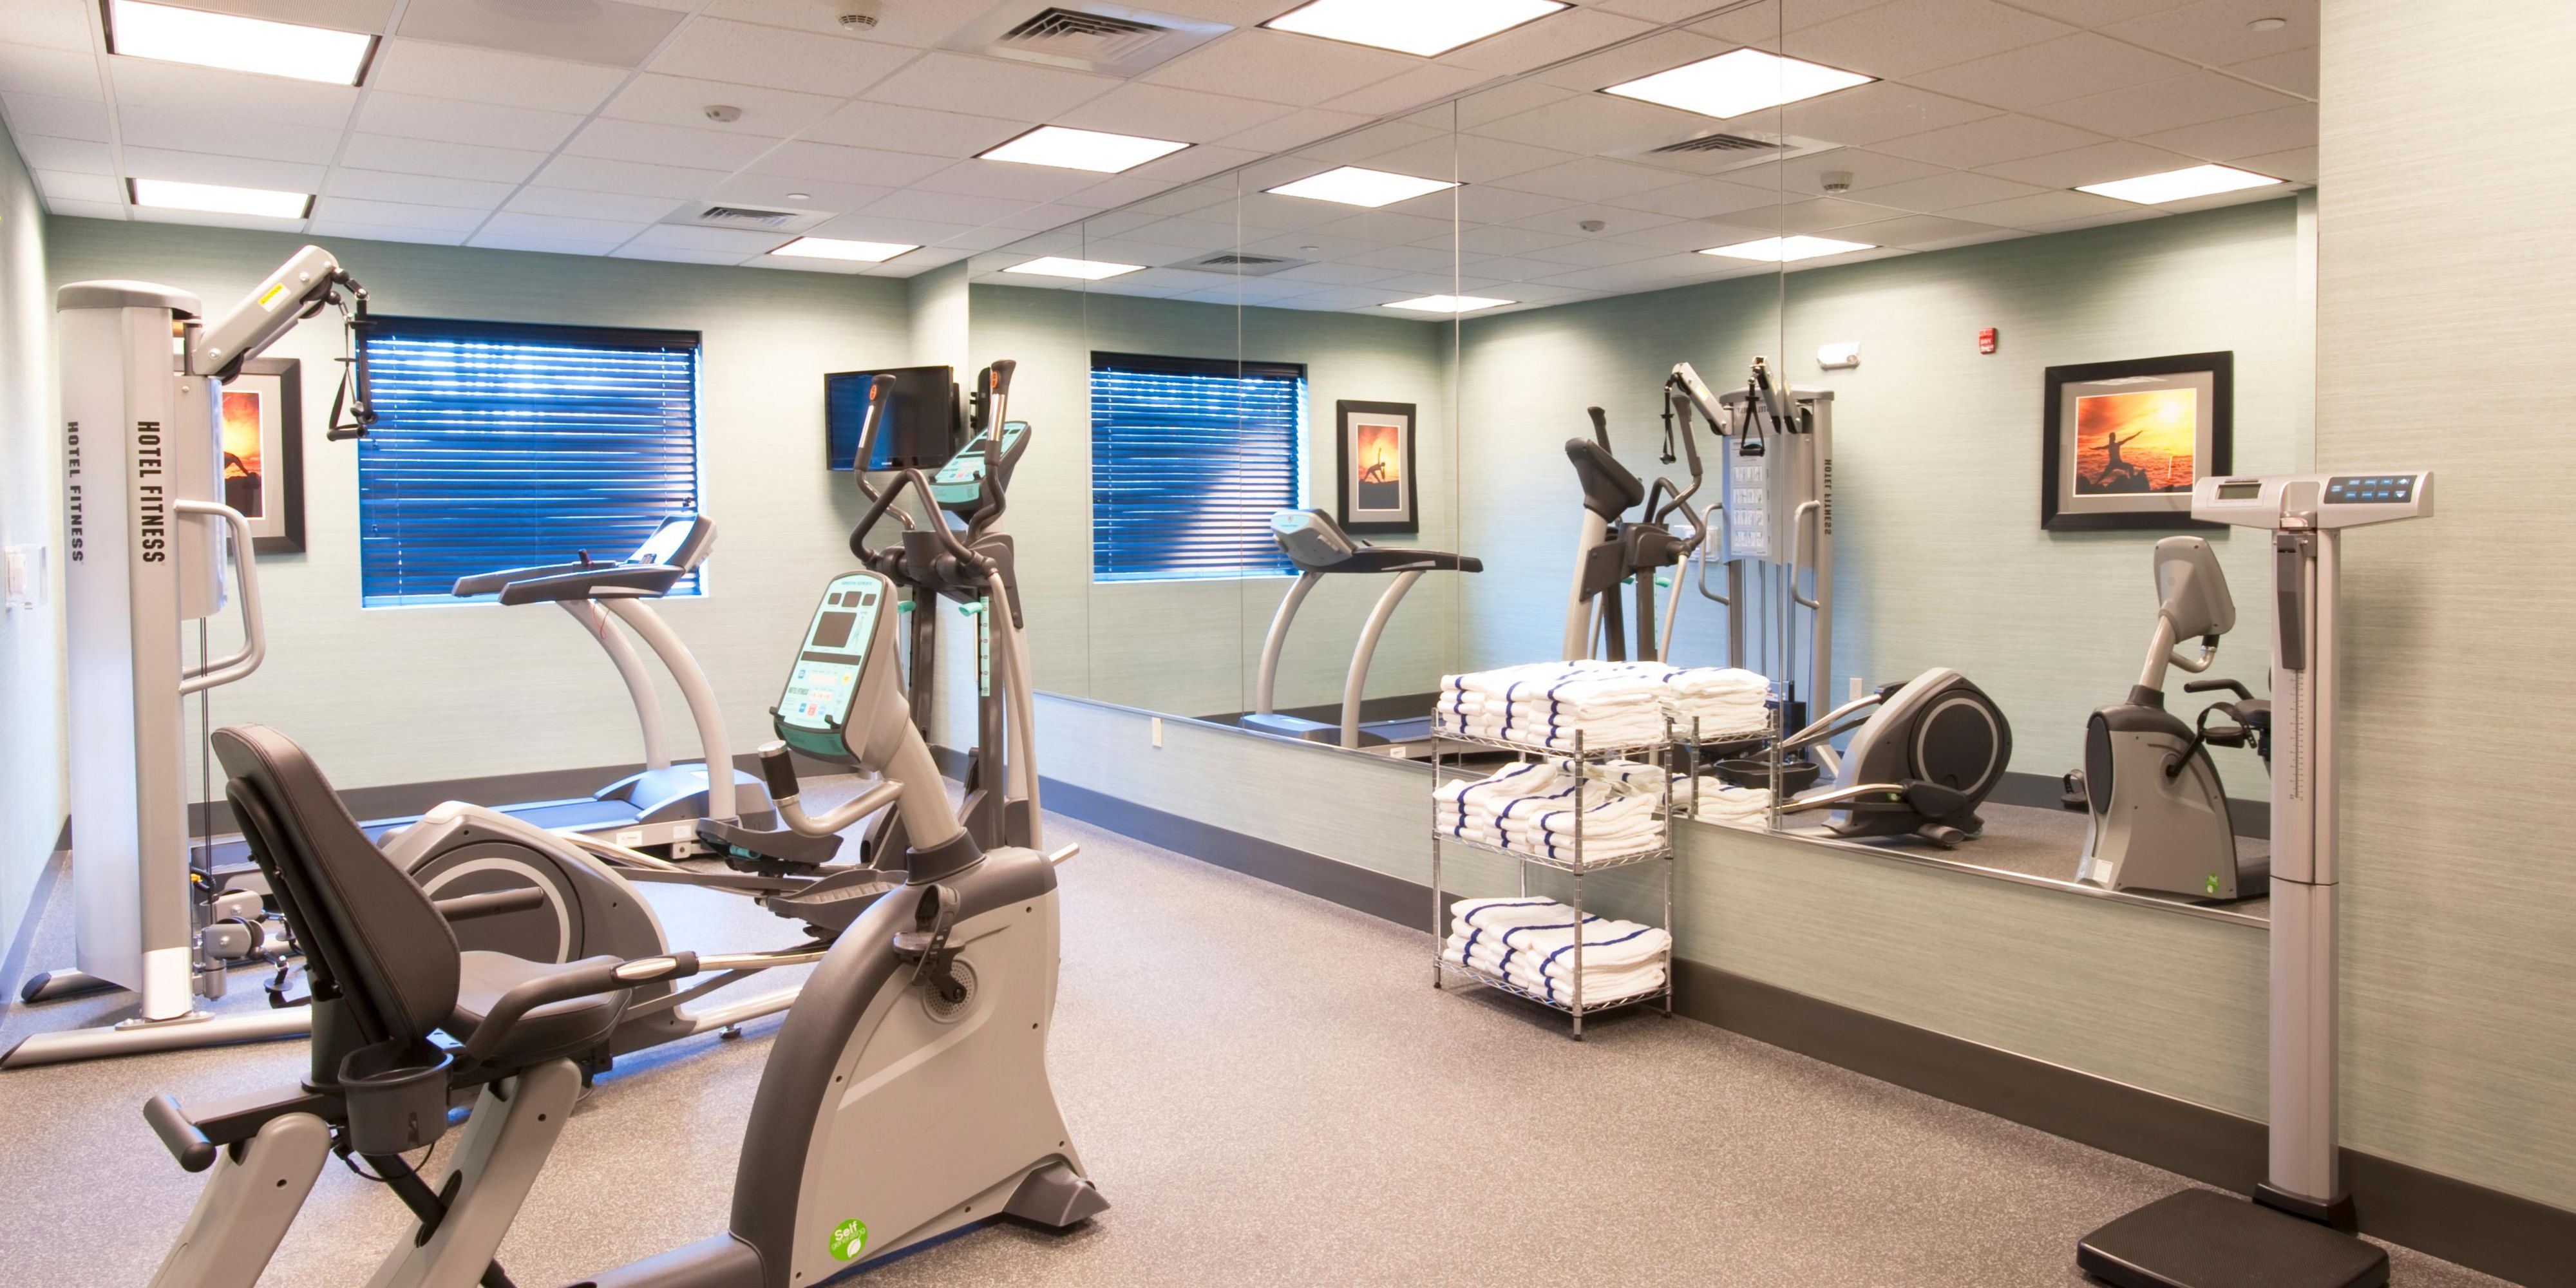 Don't get out of your fitness routine when traveling. Stay on top of your health and wellness regimen during your stay with access to our 24-hour fitness center. 